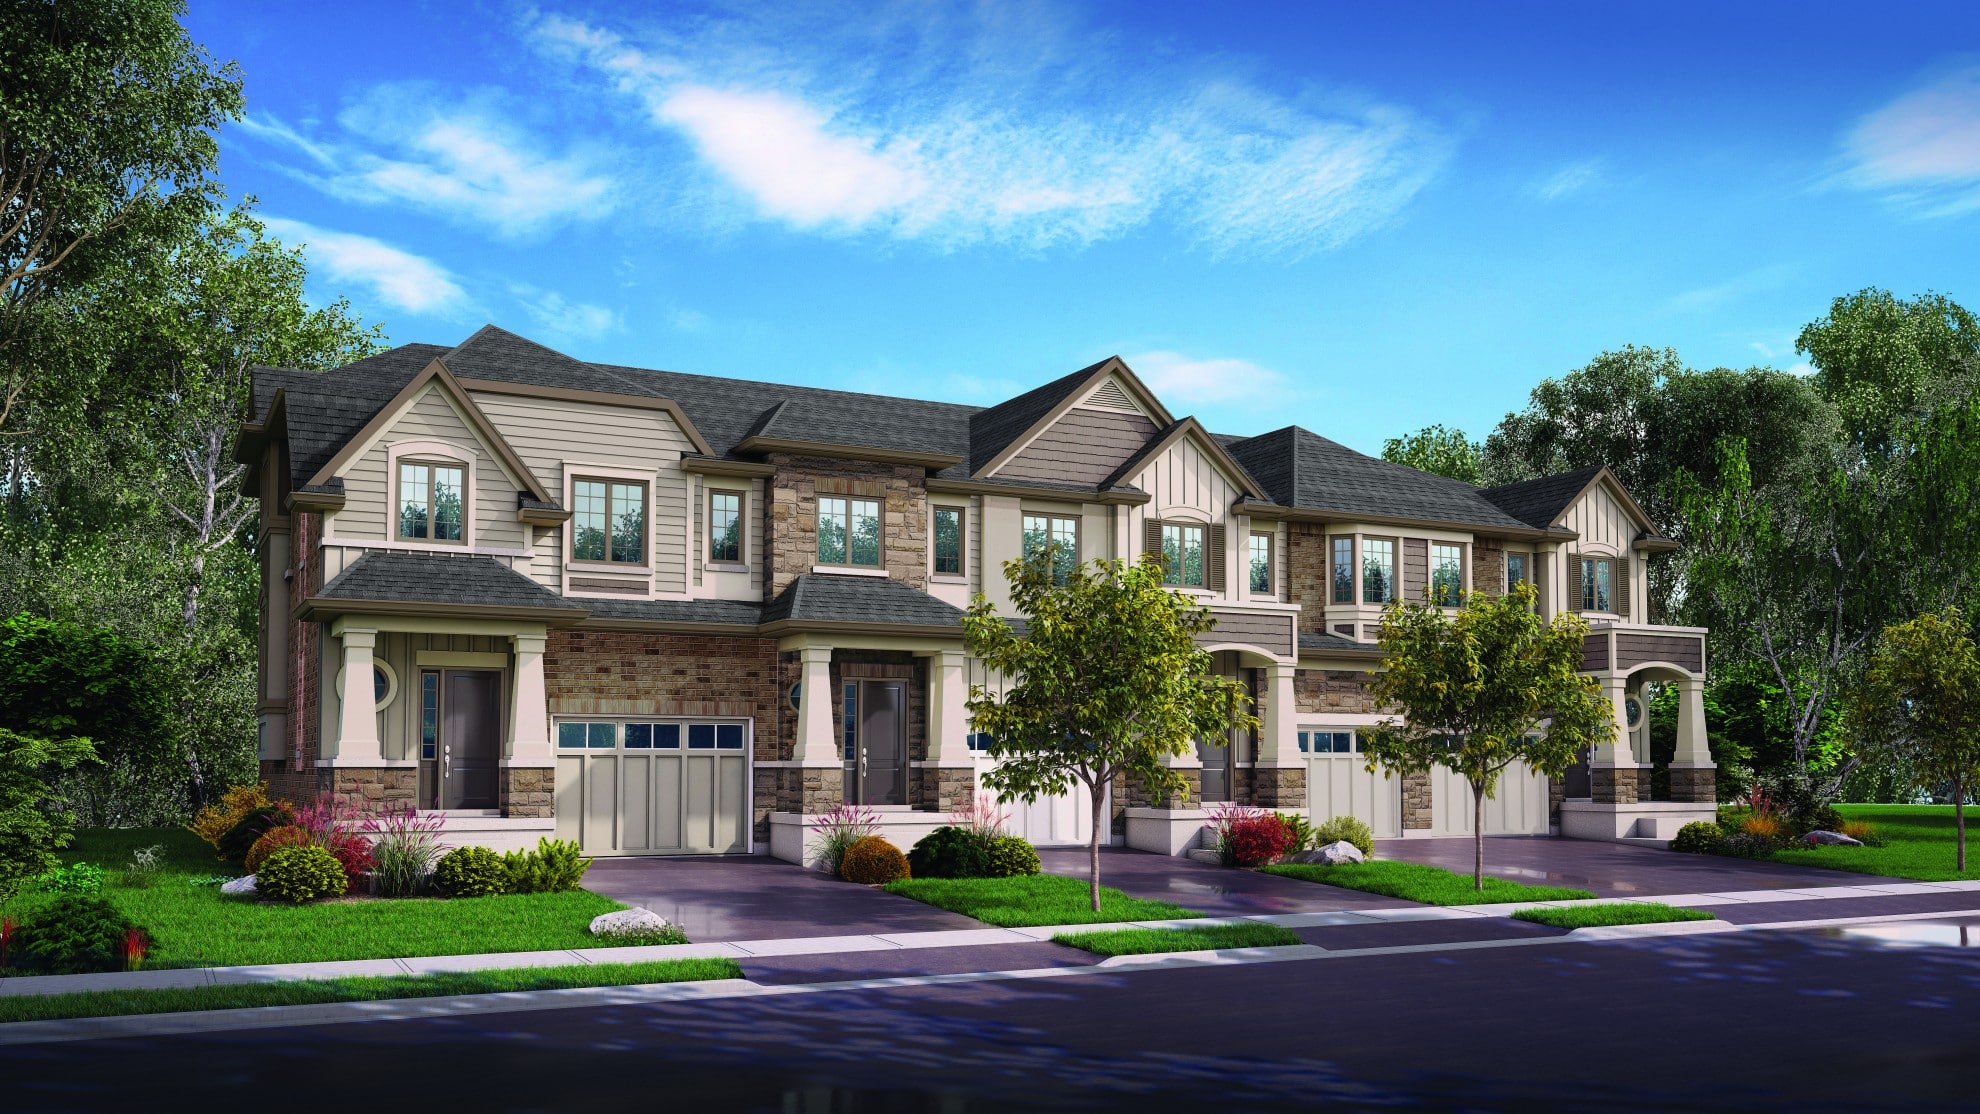 Smithville Station is now open, an affordable new home community in the heart of Niagara